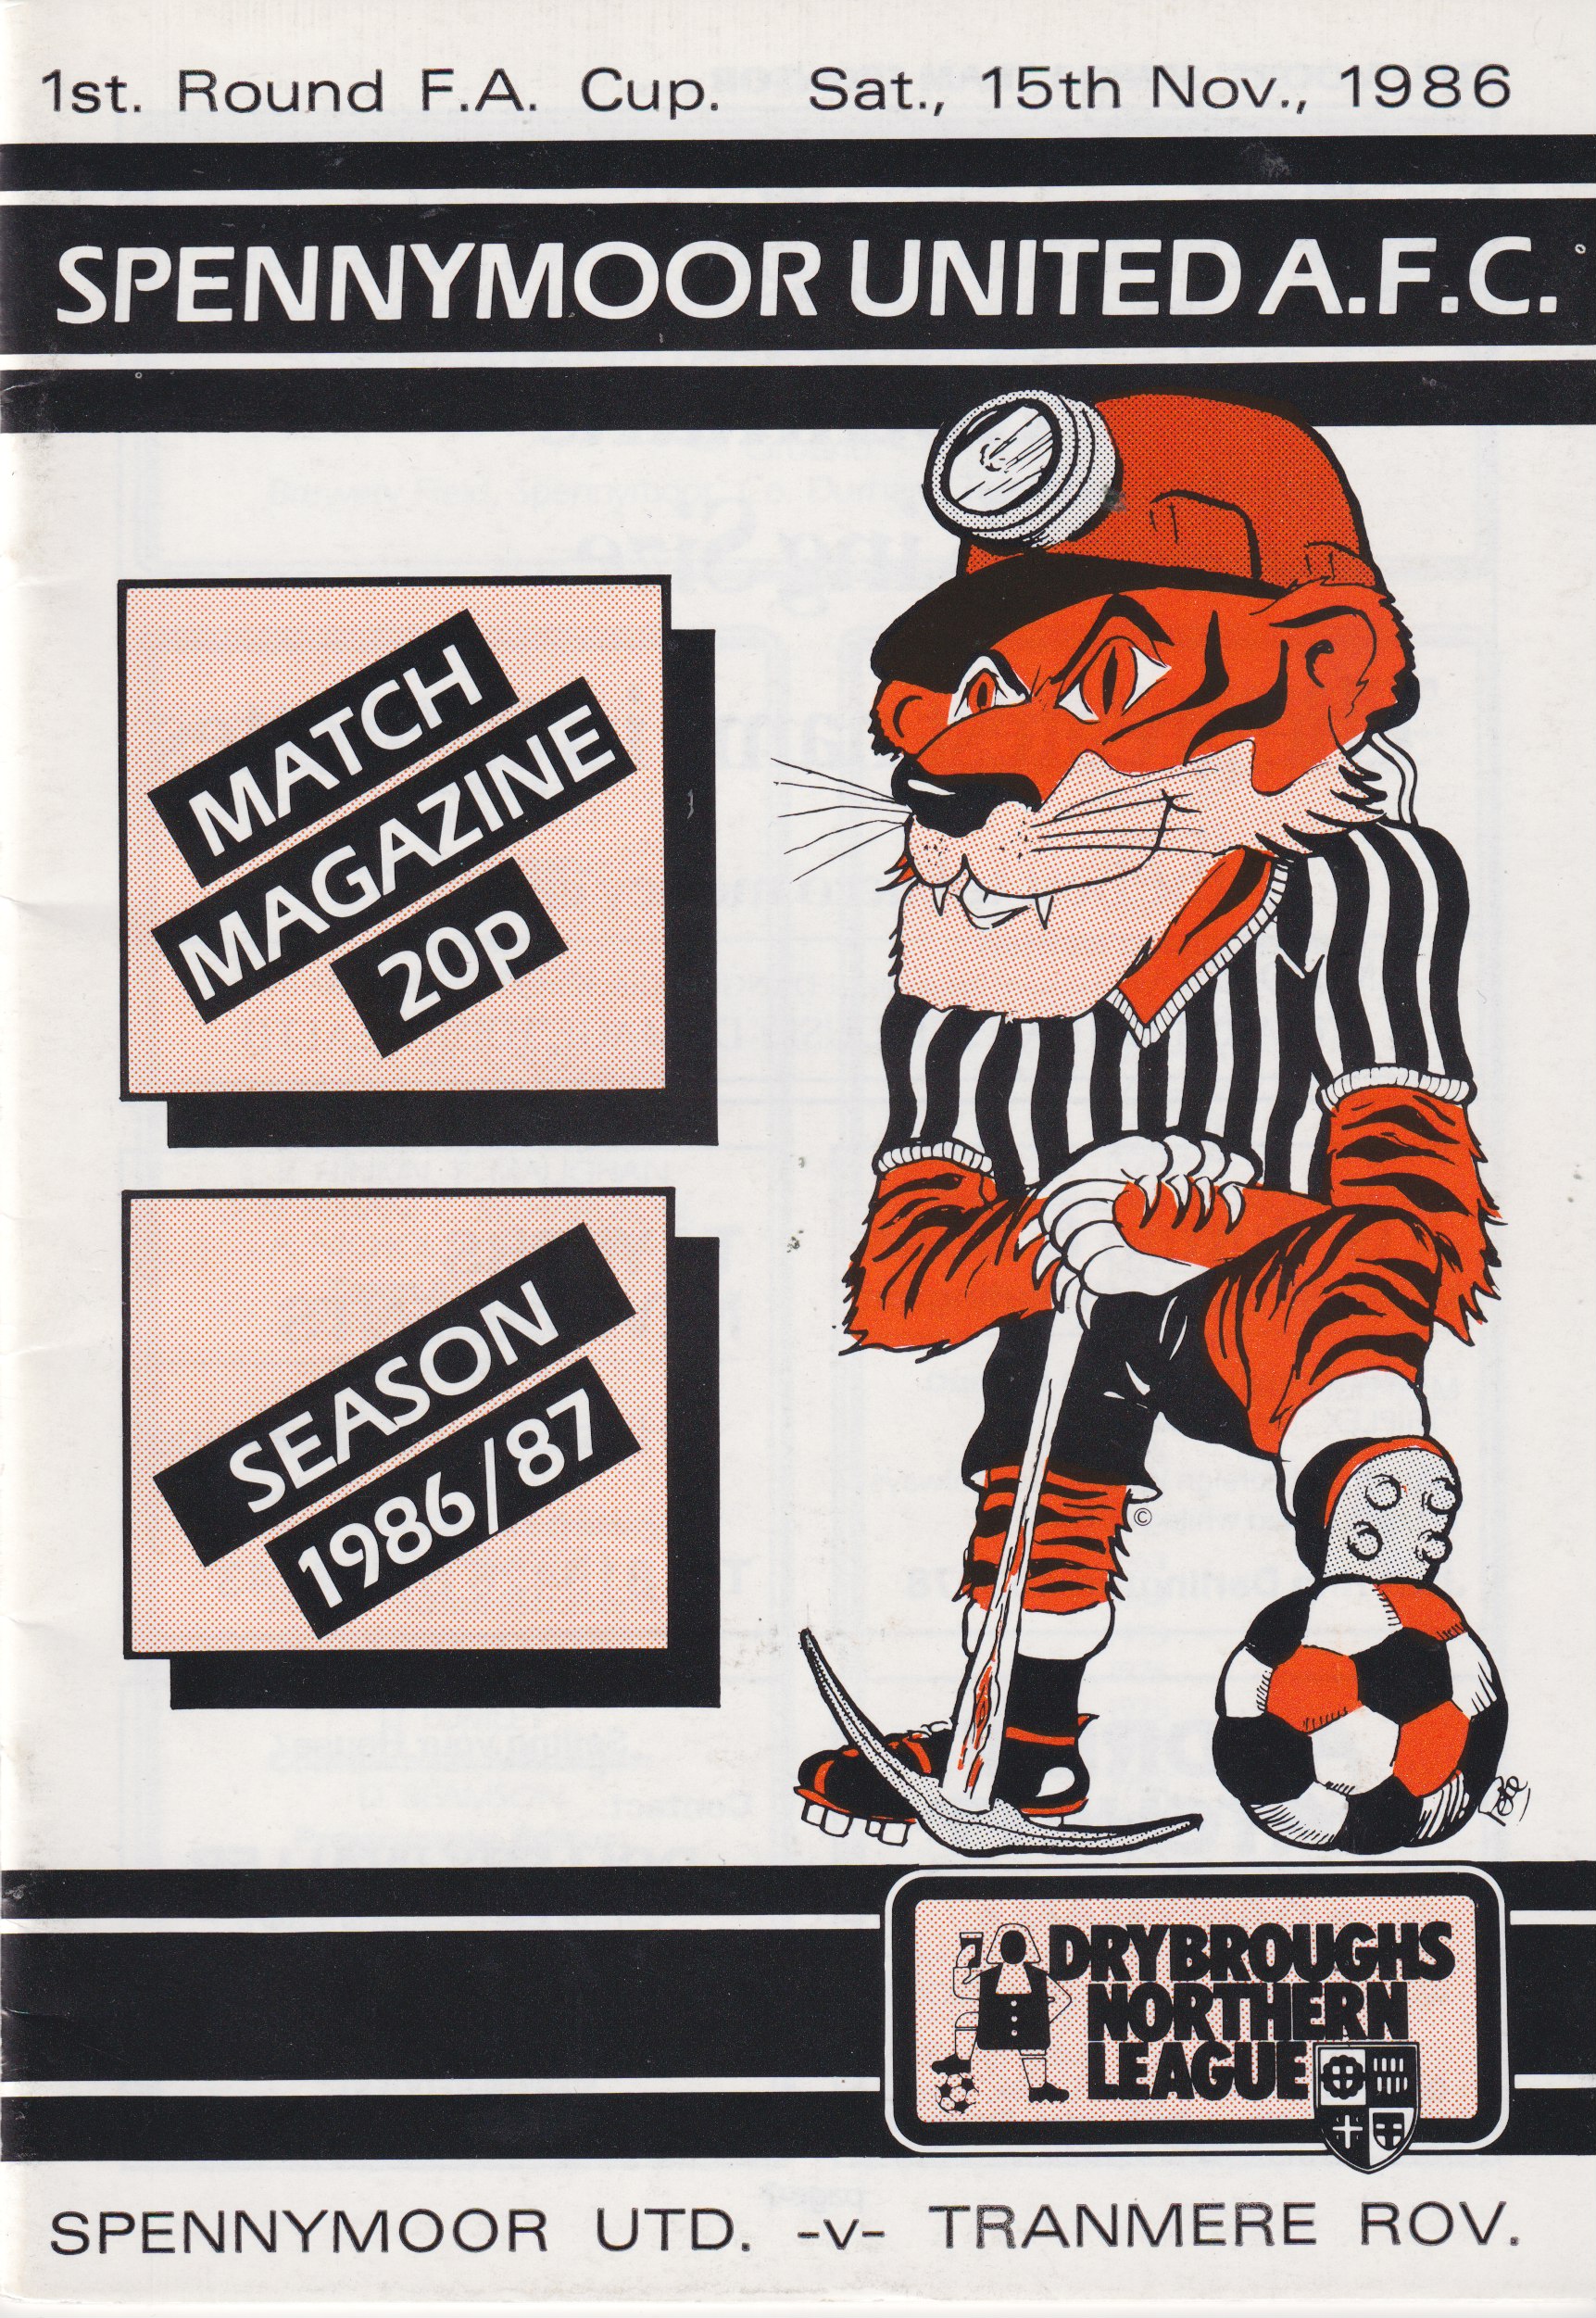 Match Programme For {home}} 2-3 Tranmere Rovers, FA Cup, 1986-11-15